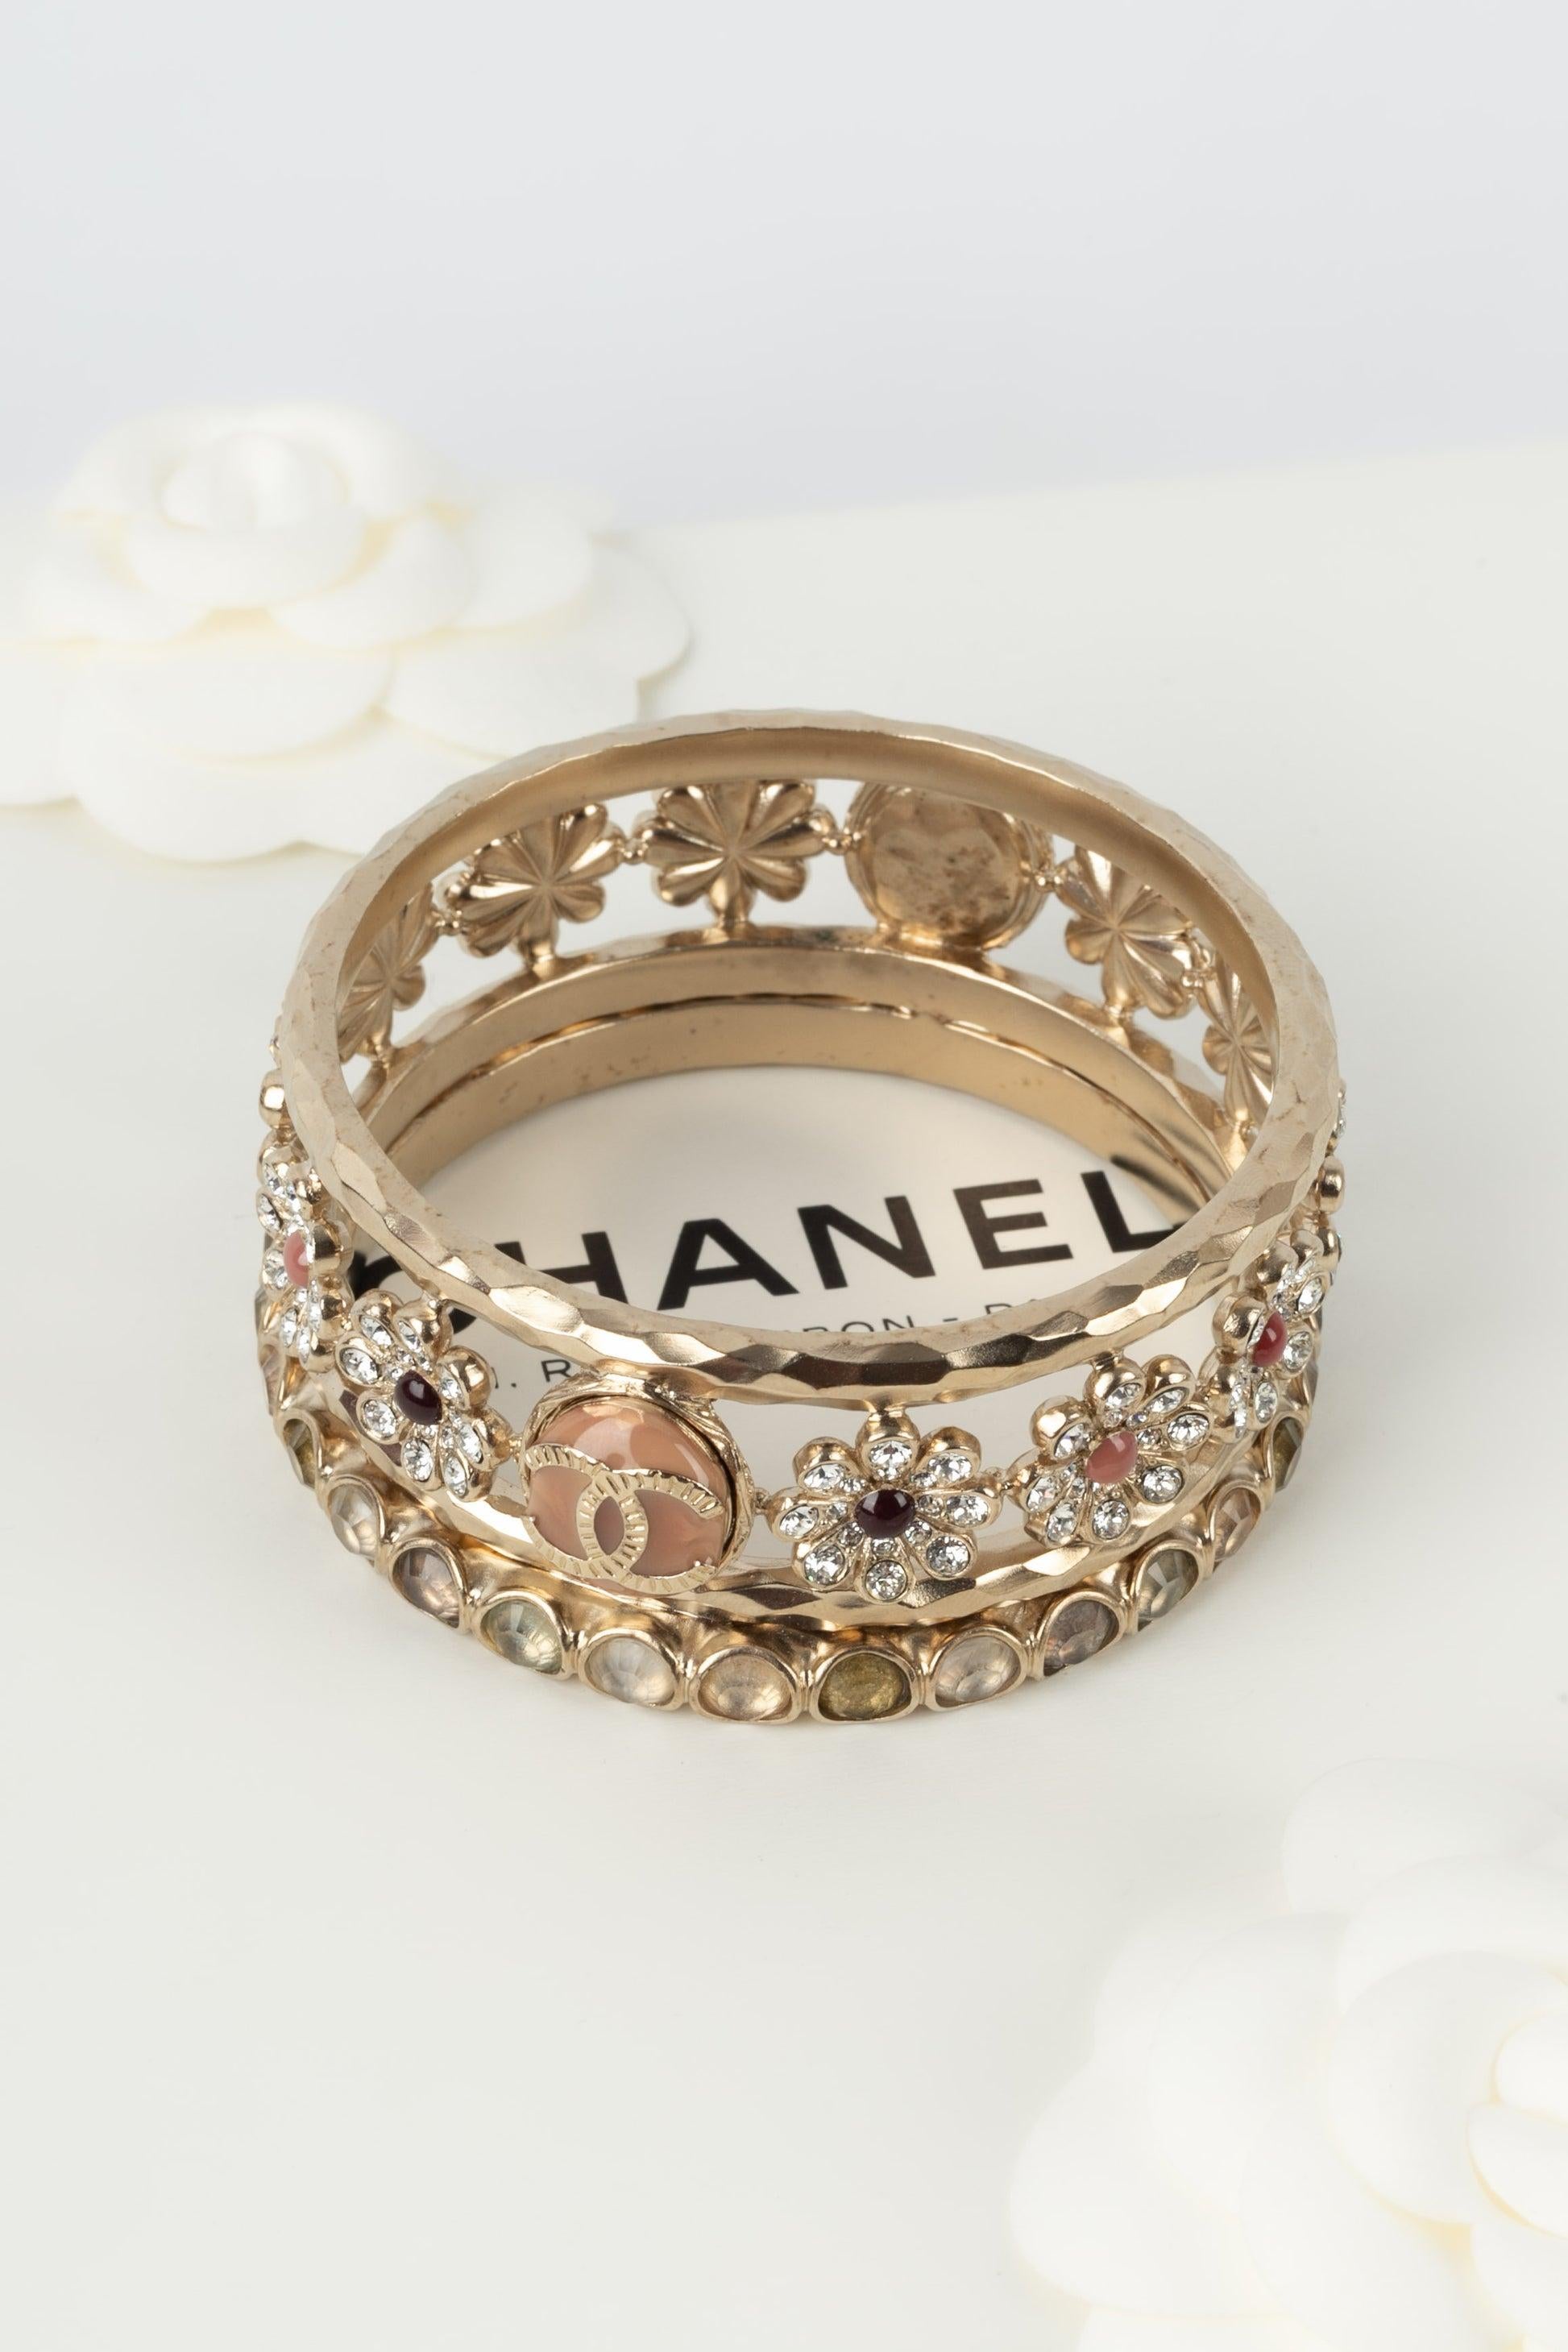 Chanel Cruise Champagne Metal Bracelet with Rhinestones and Resin, 2018 For Sale 5